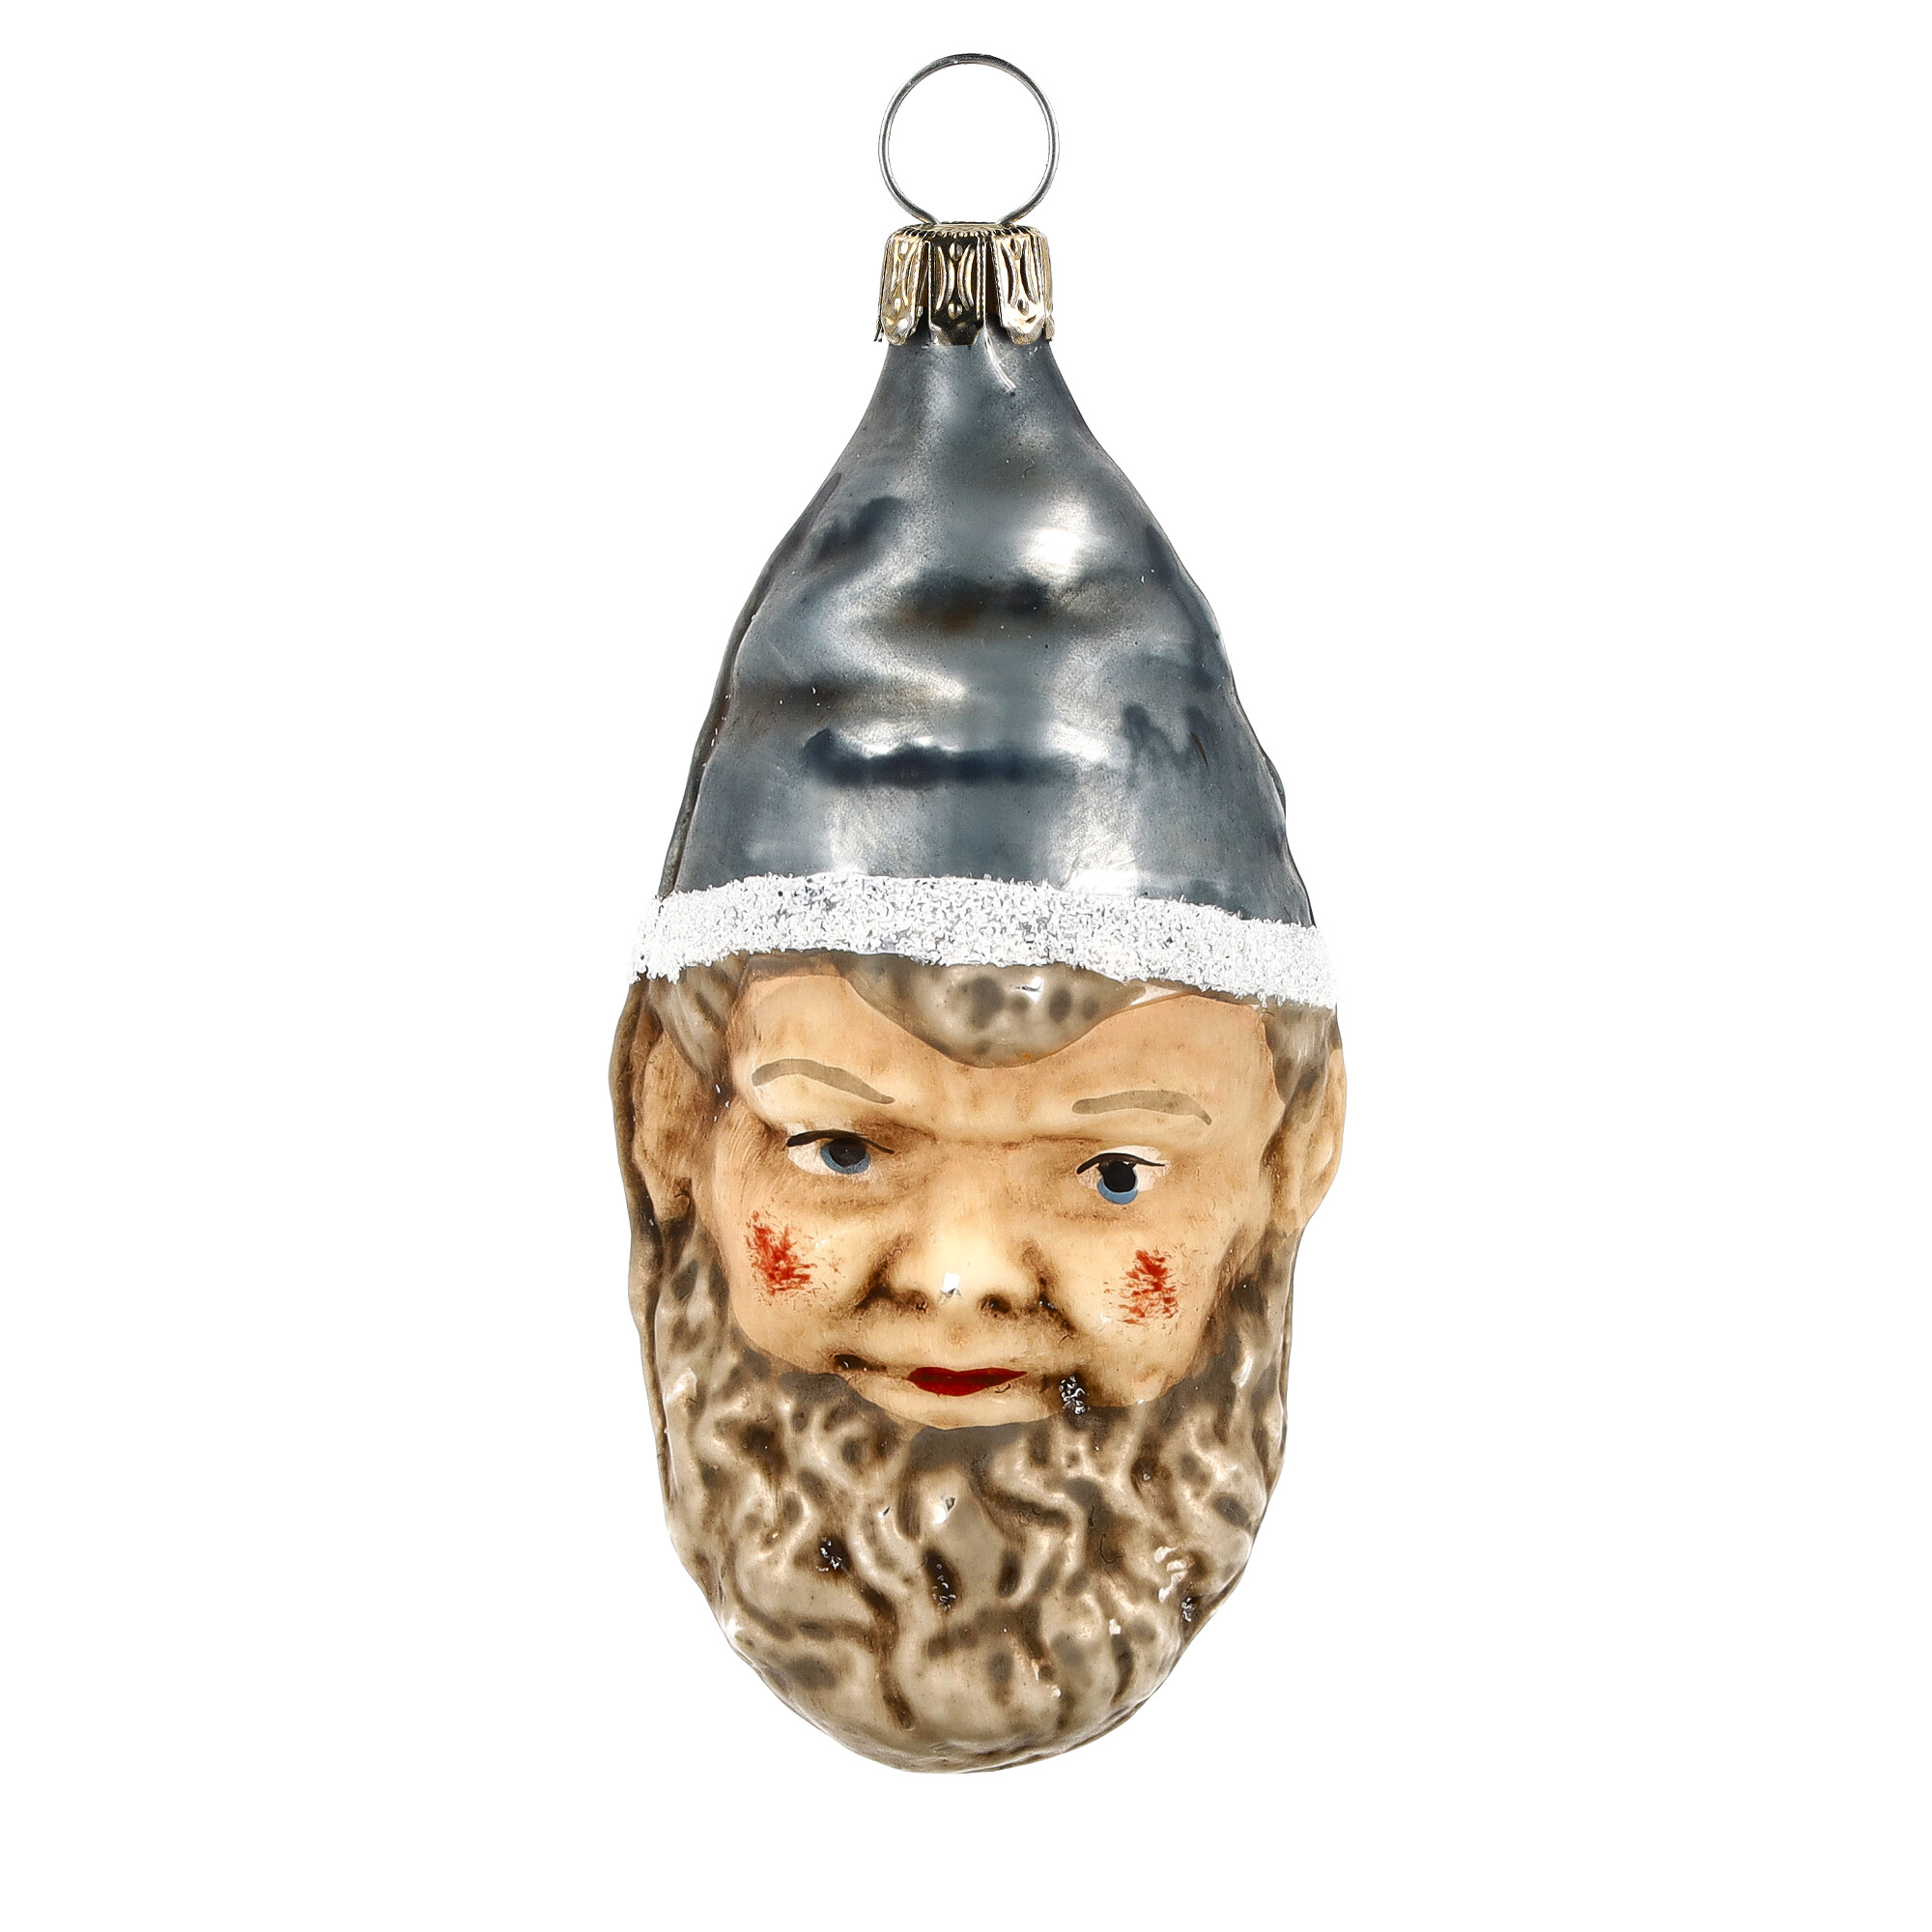 Retro Vintage style Christmas Glass Ornament - Dwarf with blue hat